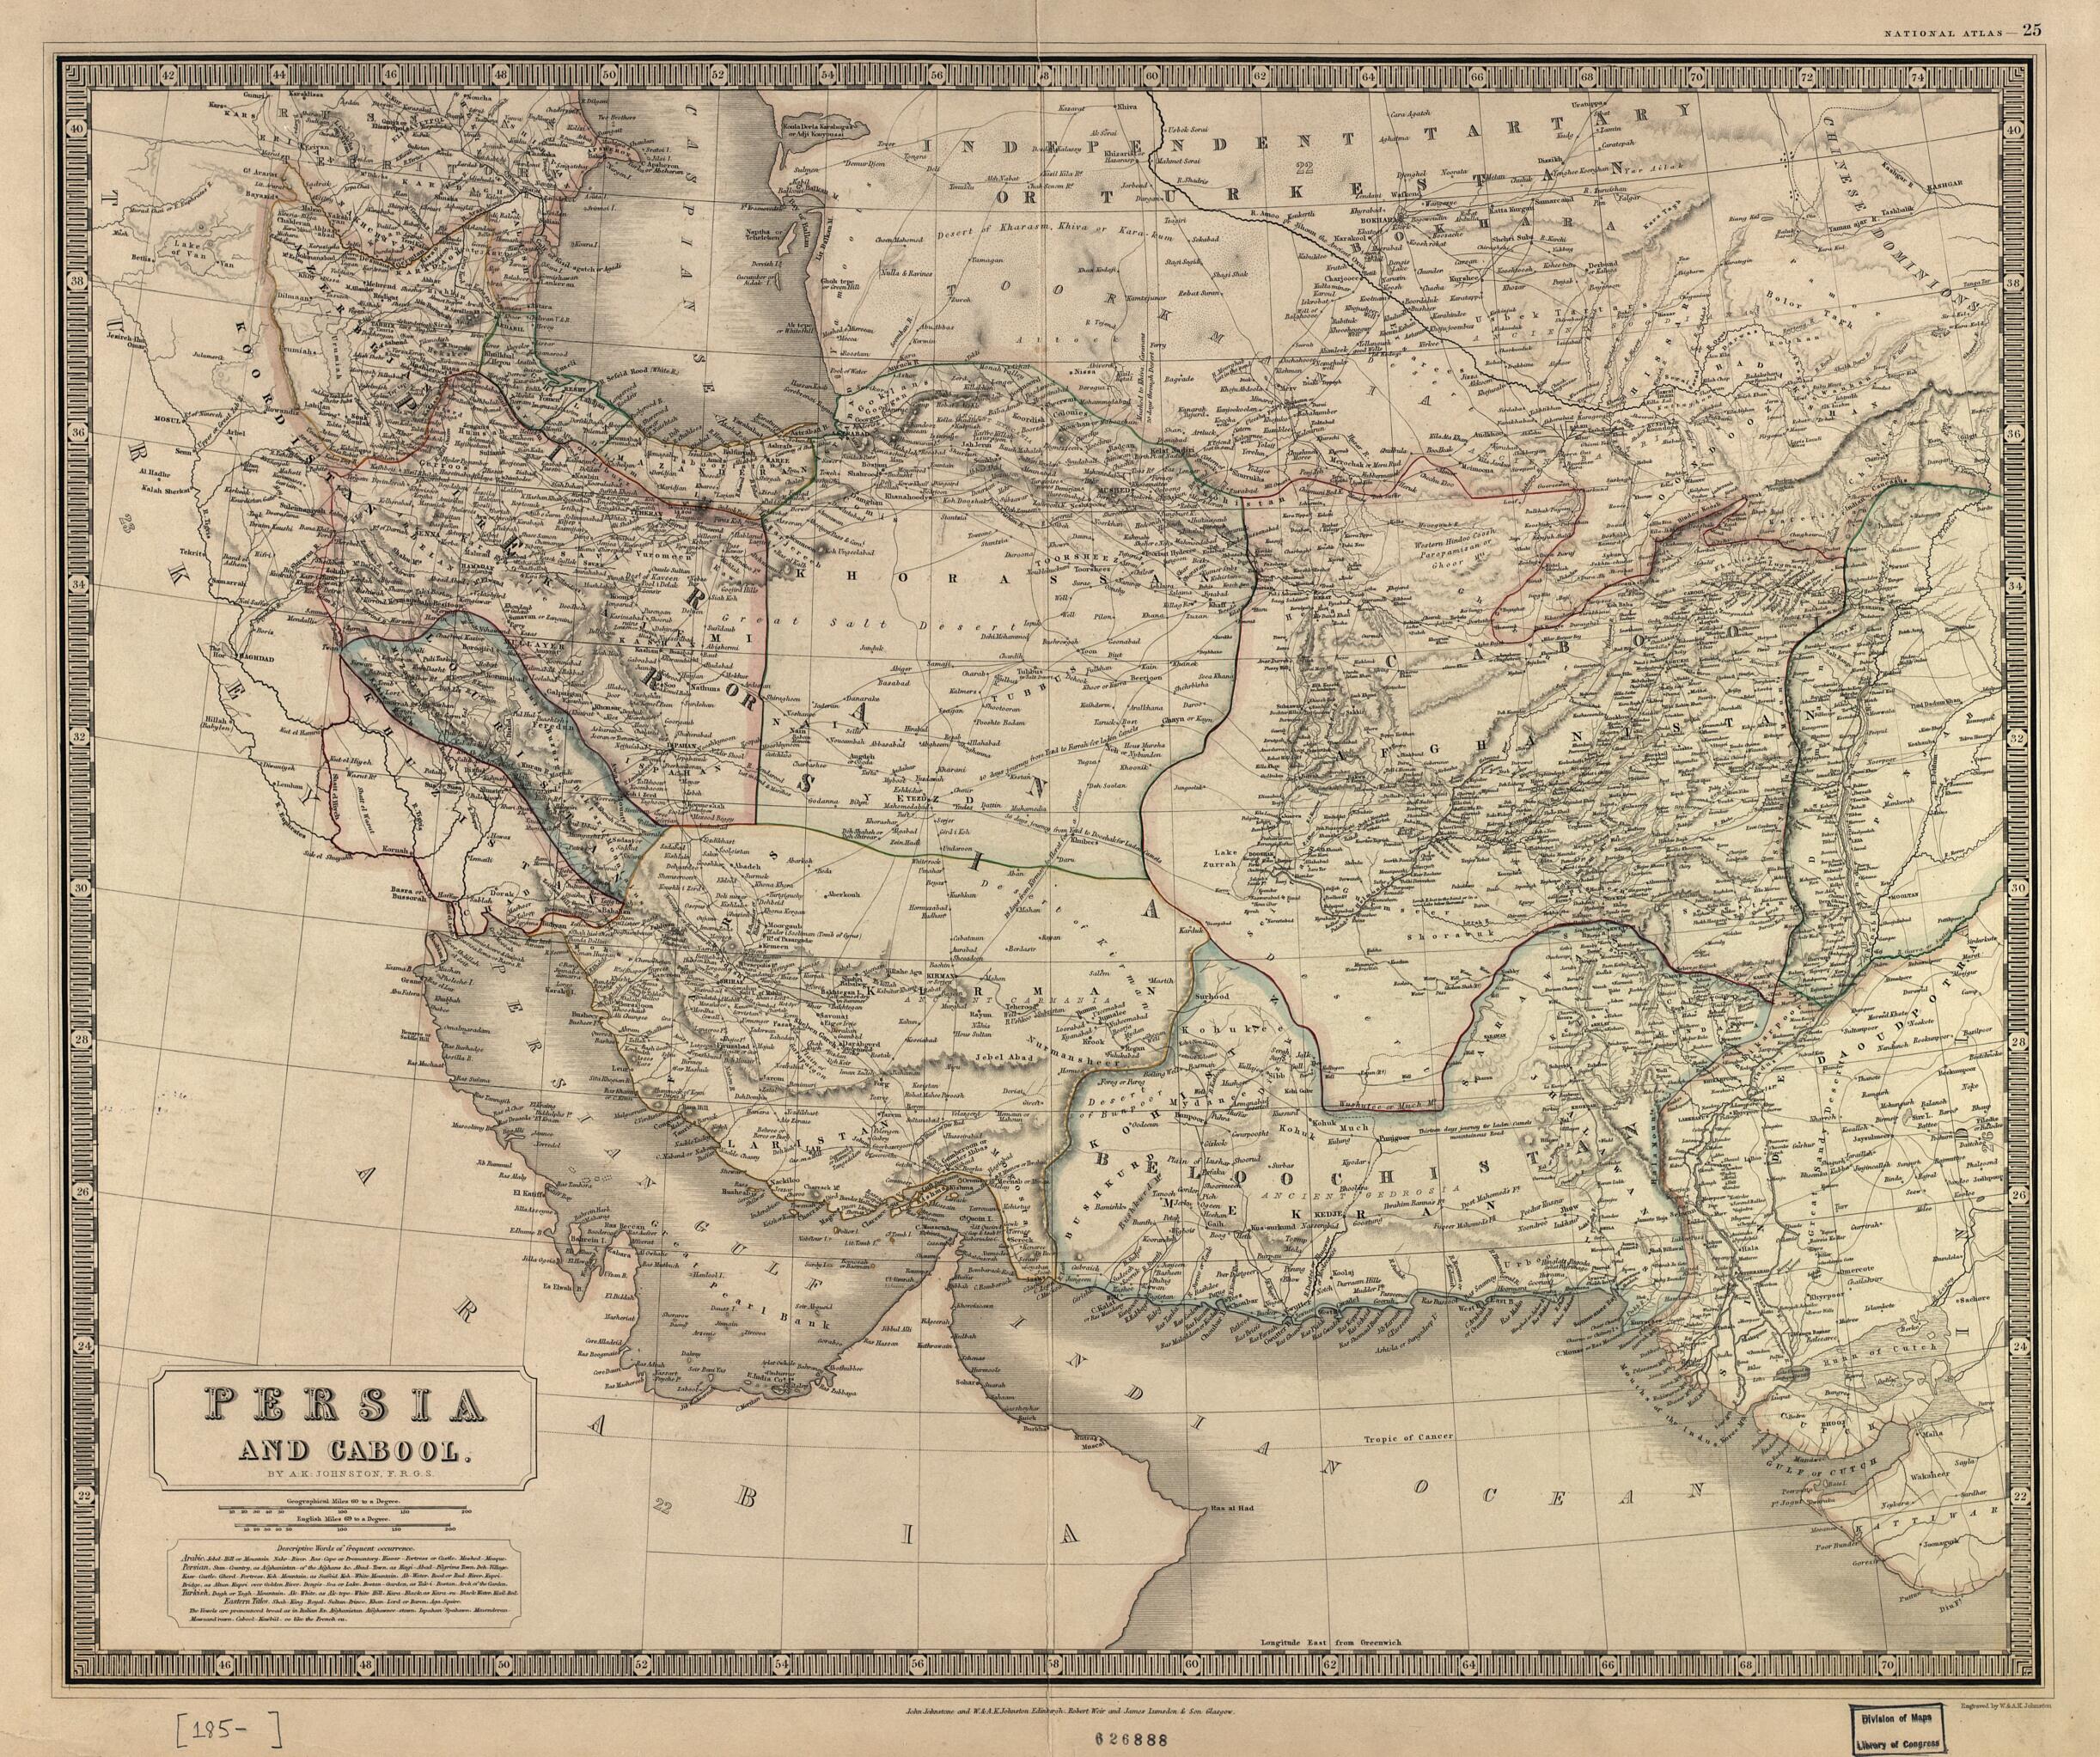 This old map of Persia and Cabool from 1850 was created by Alexander Keith Johnston in 1850